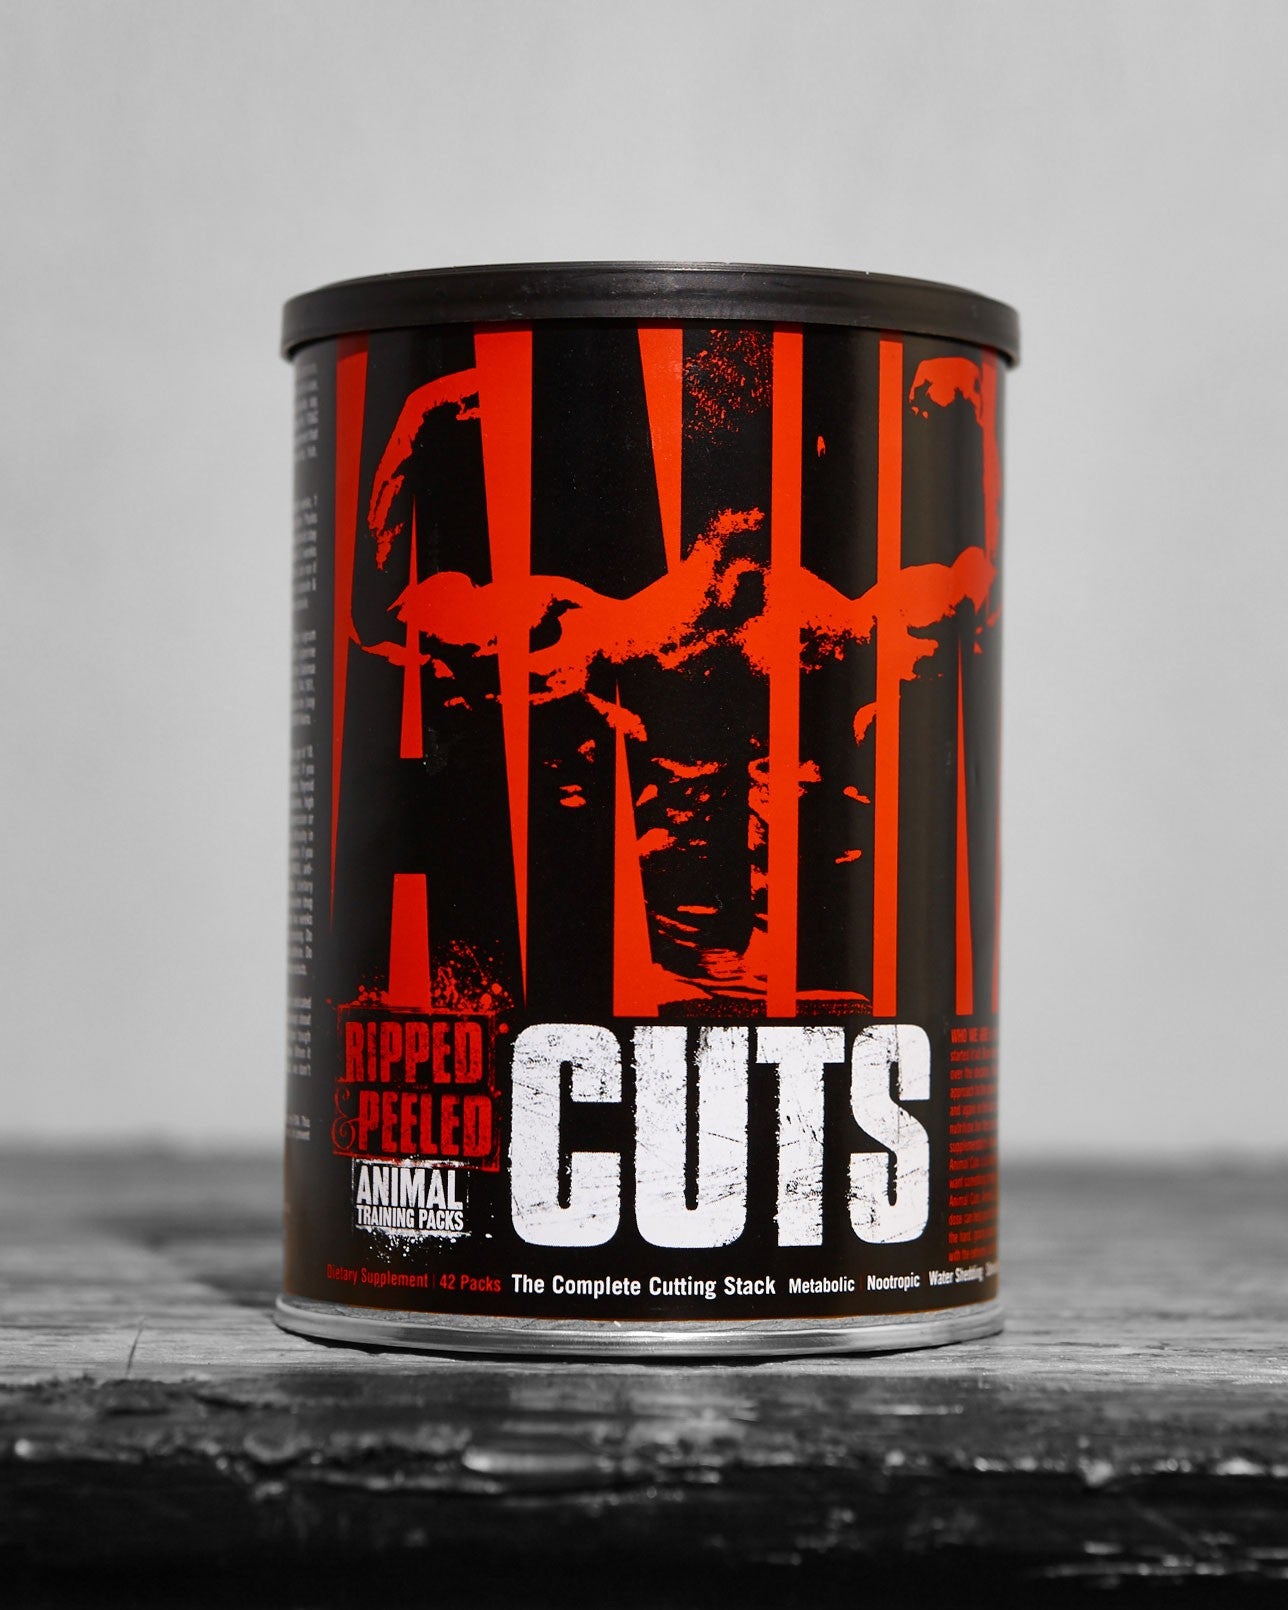 Universal Animal Cuts 42Packs no-limit-fitness-and-fight-shop.myshopify.com